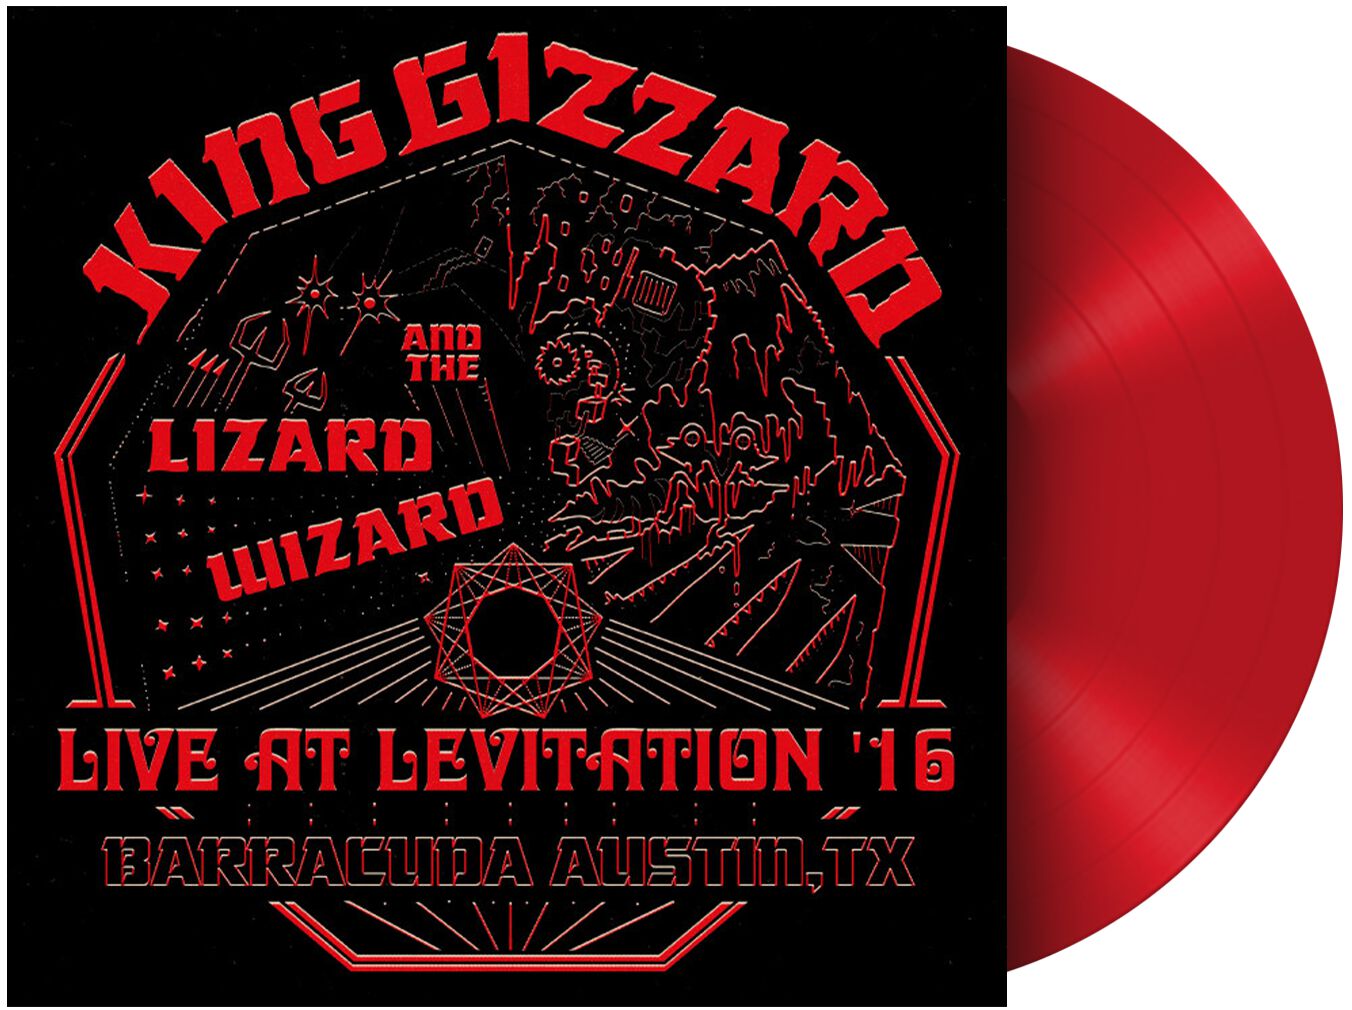 King Gizzard & The Lizard Wizard Live at Levitation '16 LP coloured